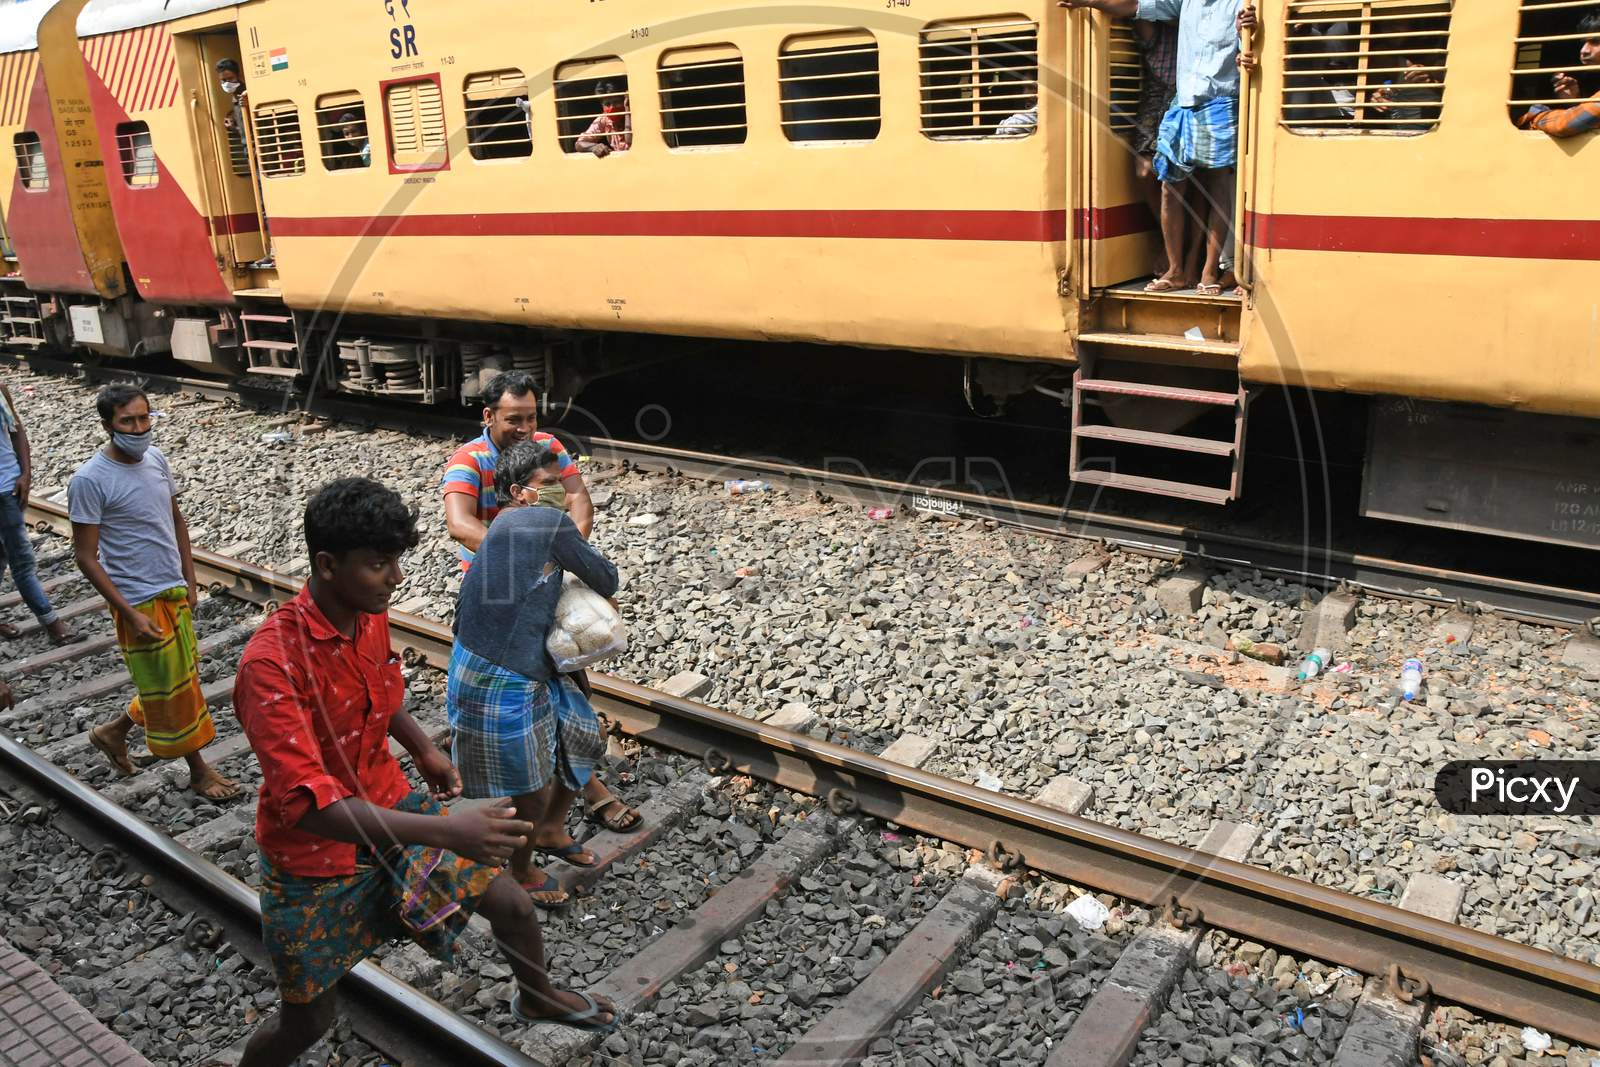 Migrant workers stranded in other states due to lockdown in the emergence of Novel Coronavirus (COVID-19) situation are being given free food by the railway department on their way home.